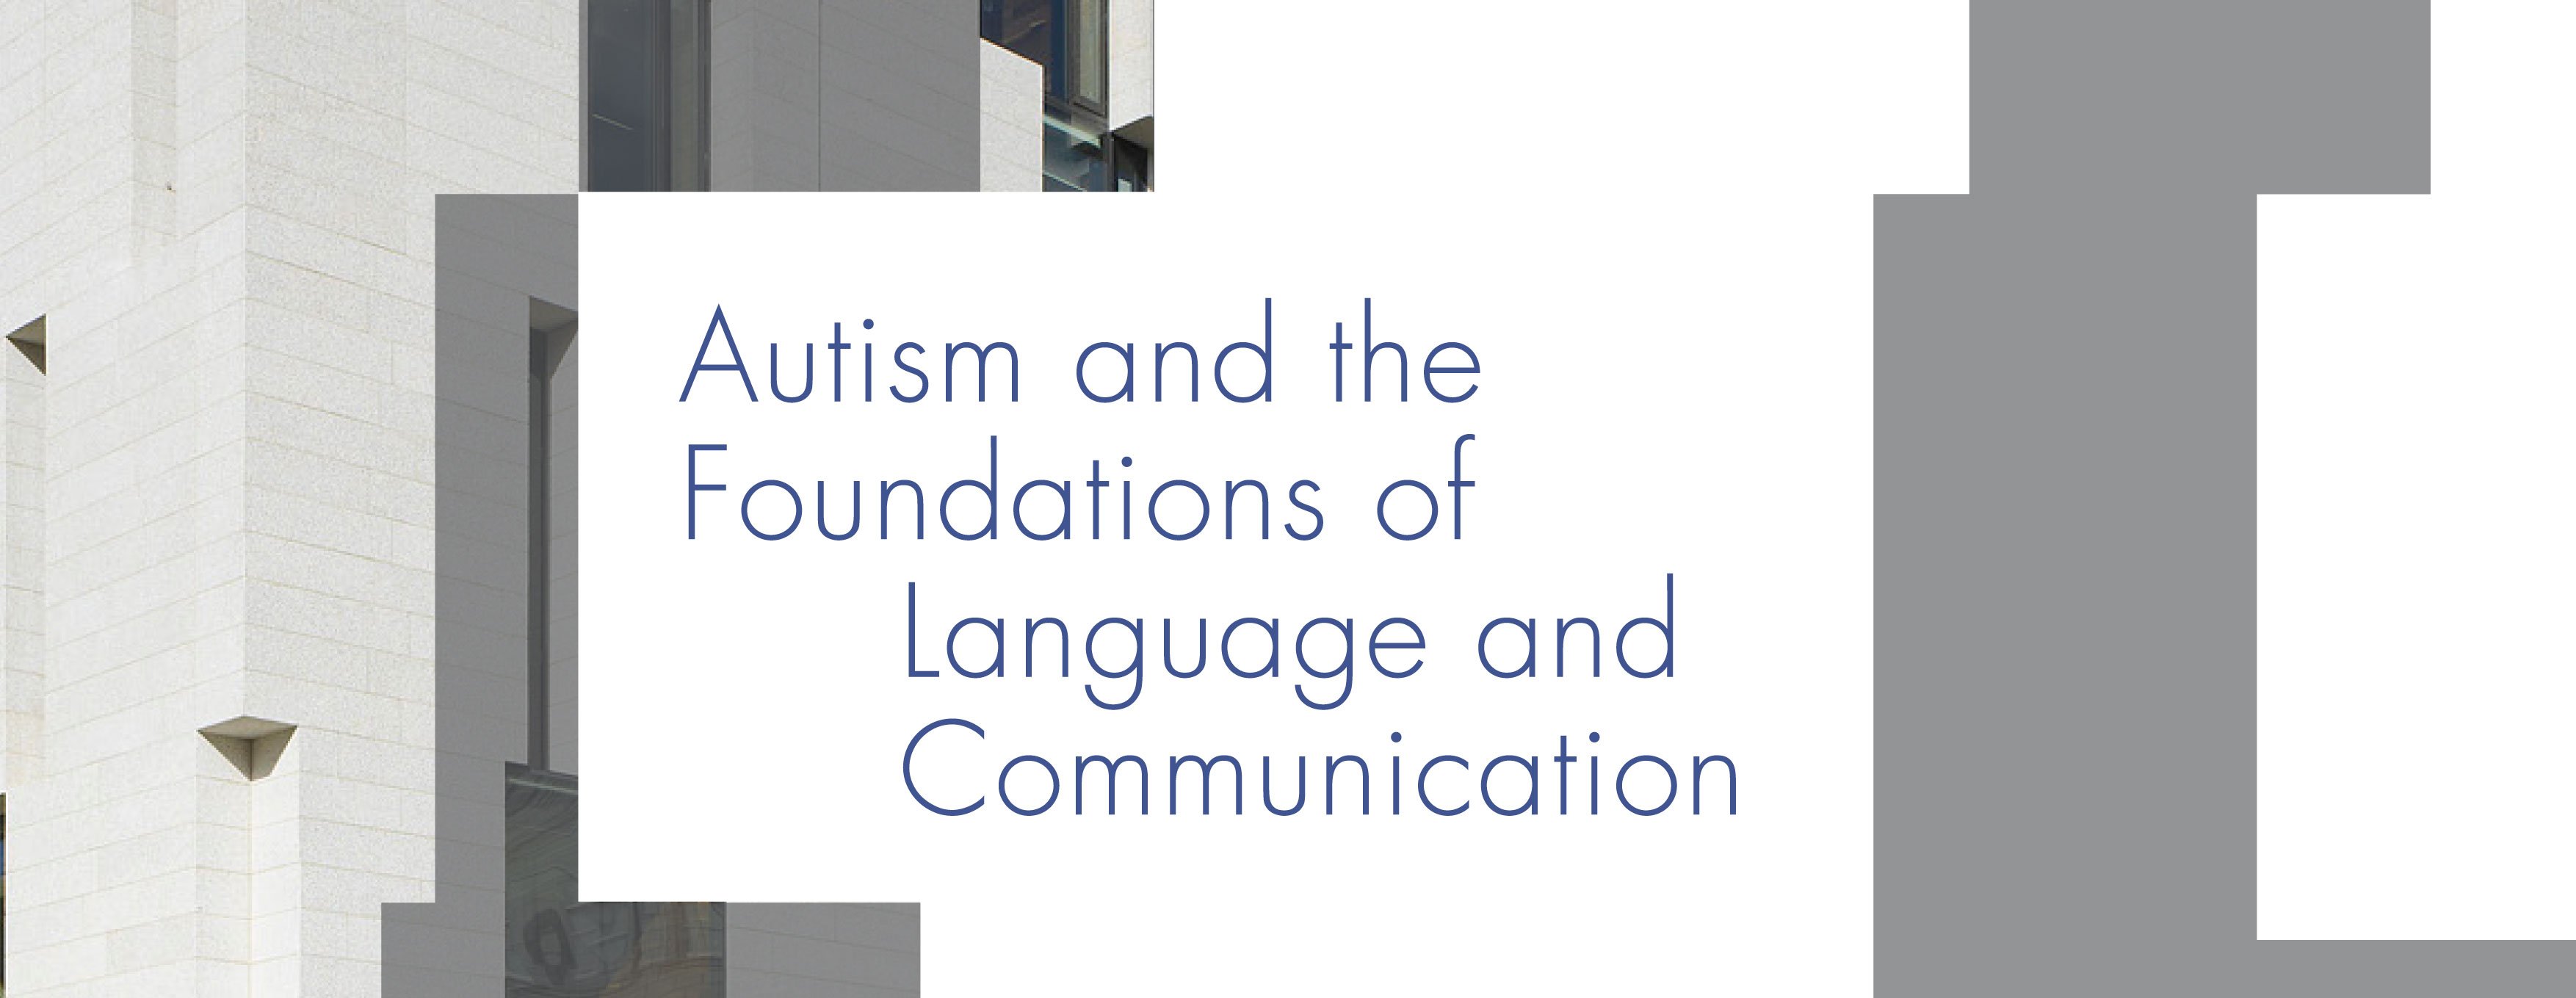 Autism and the Foundations of Language and Communication Interdisciplinary Conference